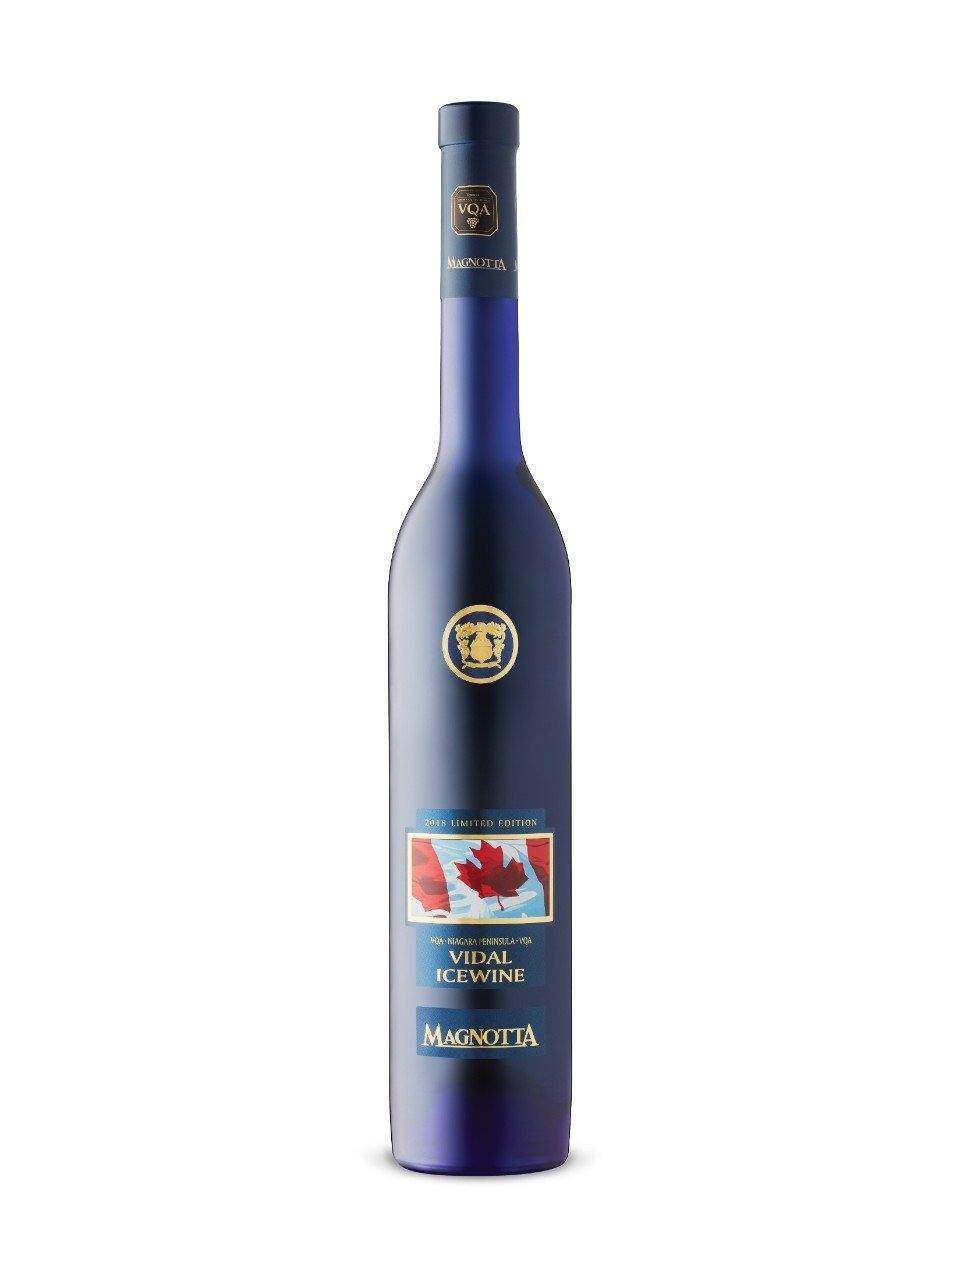 Magnotta Vidal Icewine | Exquisite Wine & Alcohol Gift Delivery Toronto Canada | Vyno